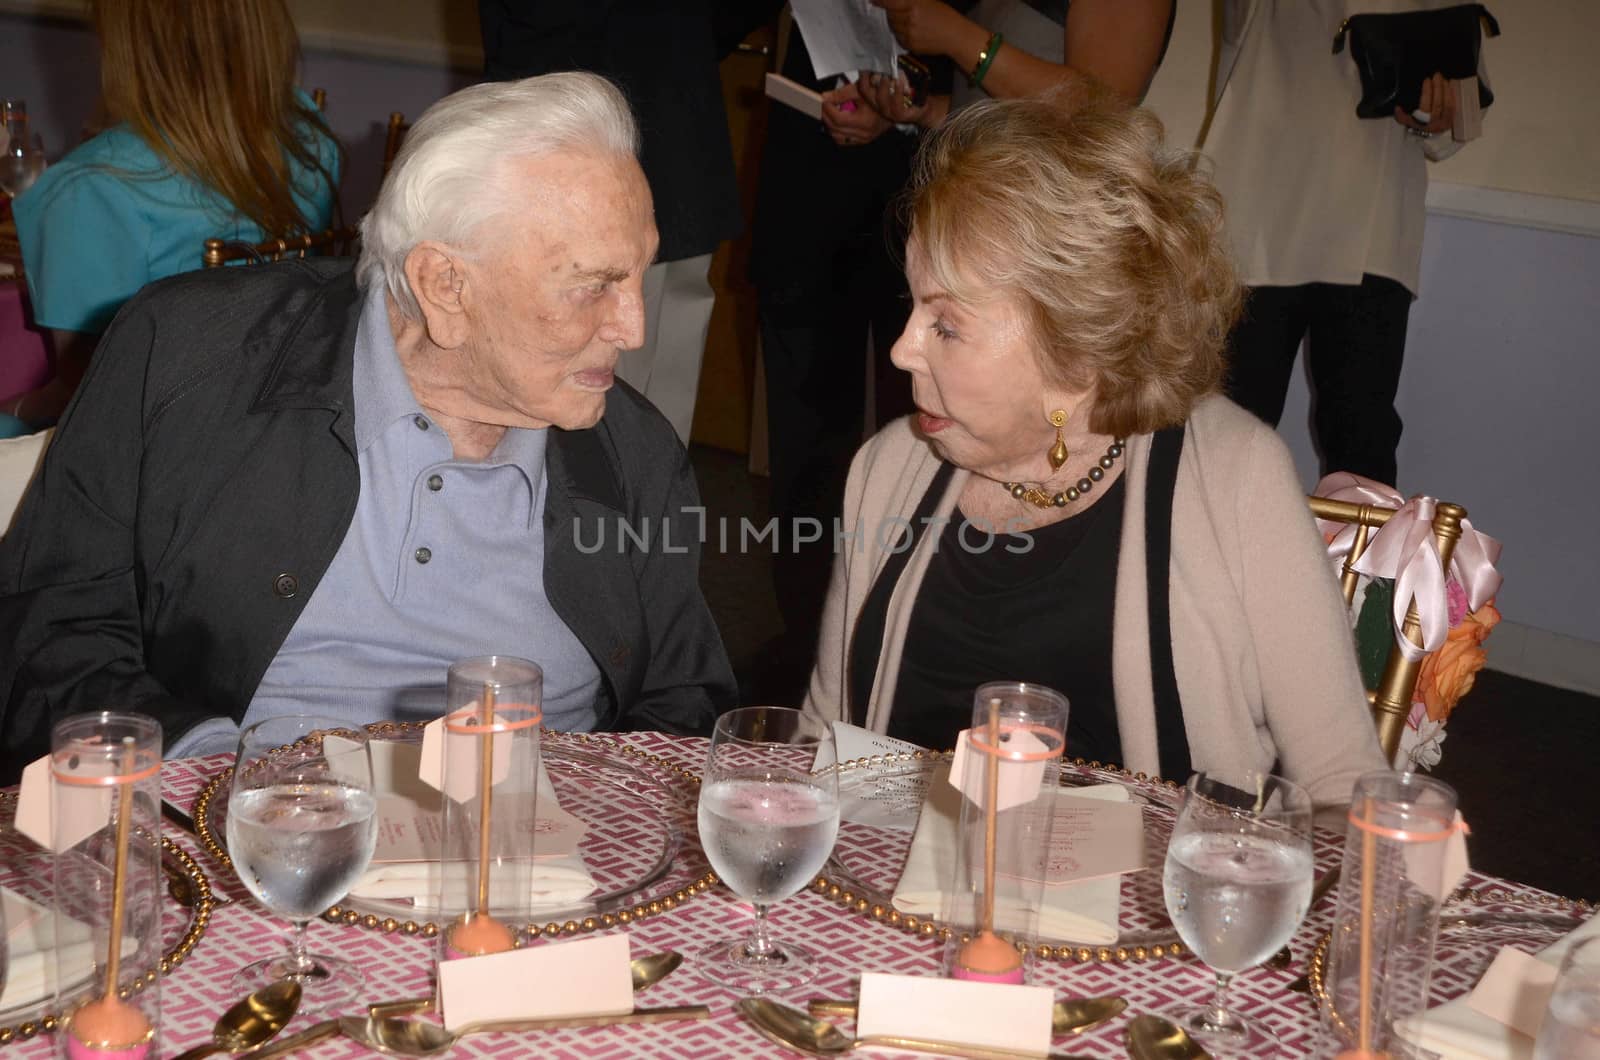 Kirk Douglas, Anne Douglas at the 25th Anniversary of the Anne Douglas Center at the LA Mission, Los Angeles, CA 05-04-17/ImageCollect by ImageCollect